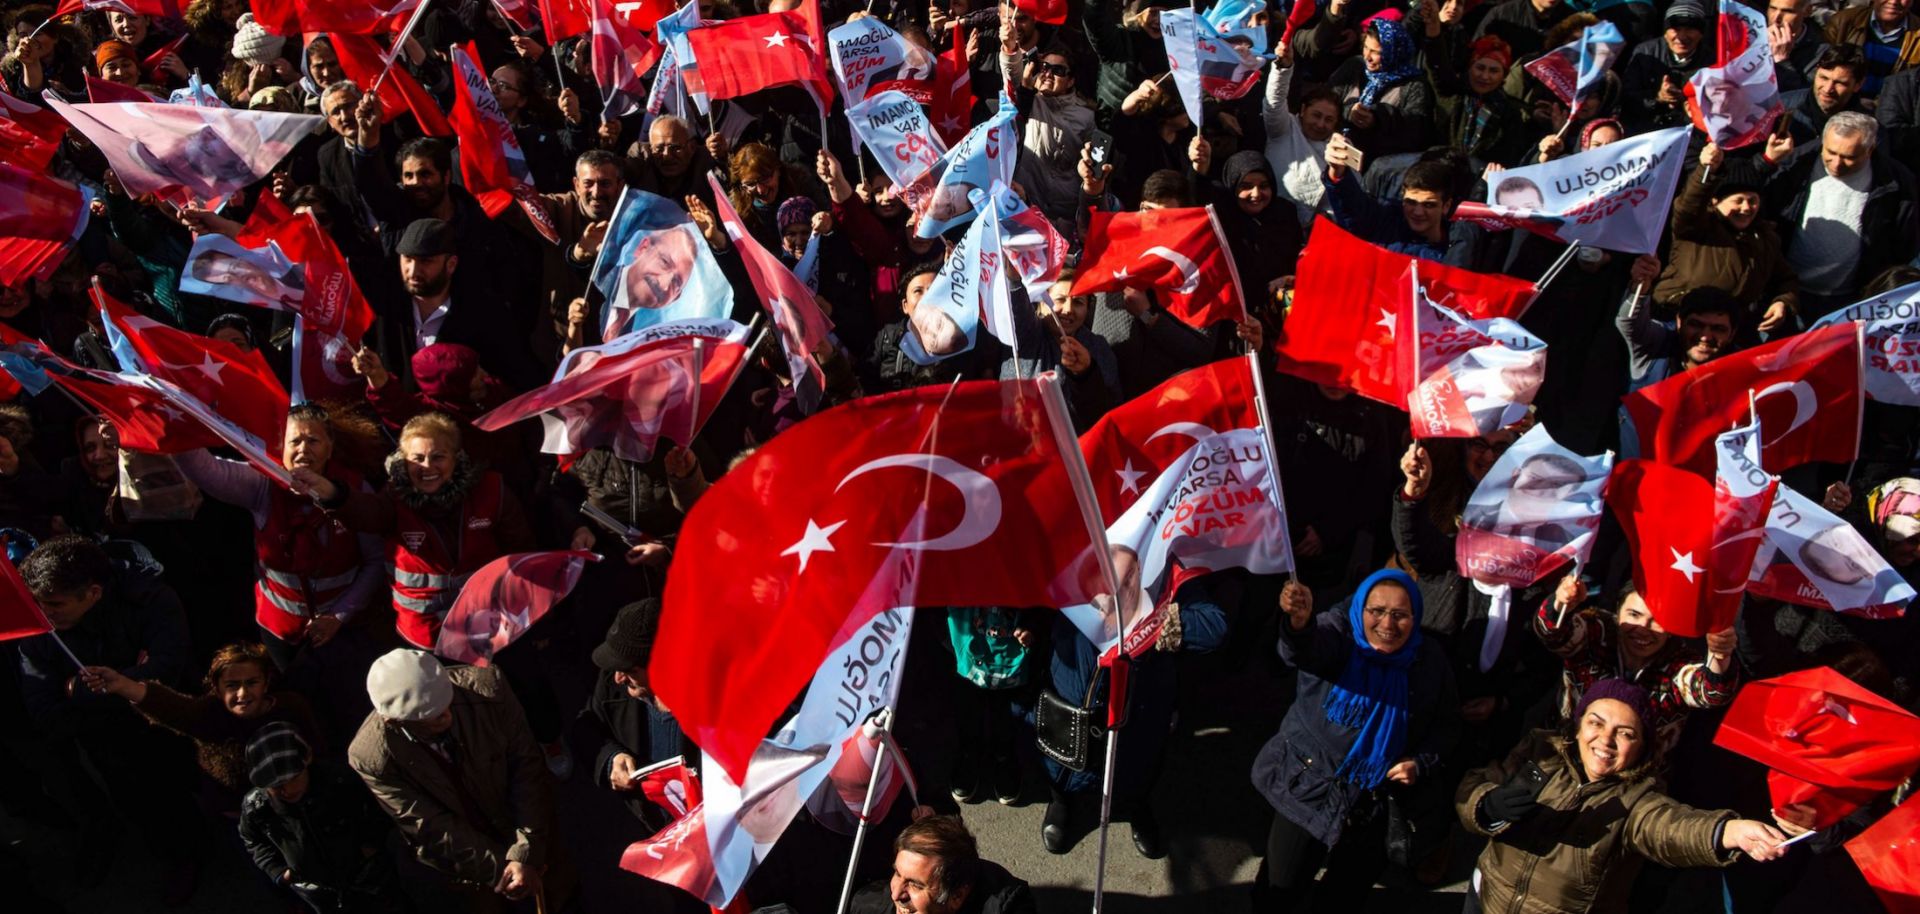 Supporters of the main opposition Republican People's Party's (CHP) mayoral candidate in Istanbul, Ekrem Imamoglu, wave flags during a rally ahead of upcoming local elections on March 29, 2019.